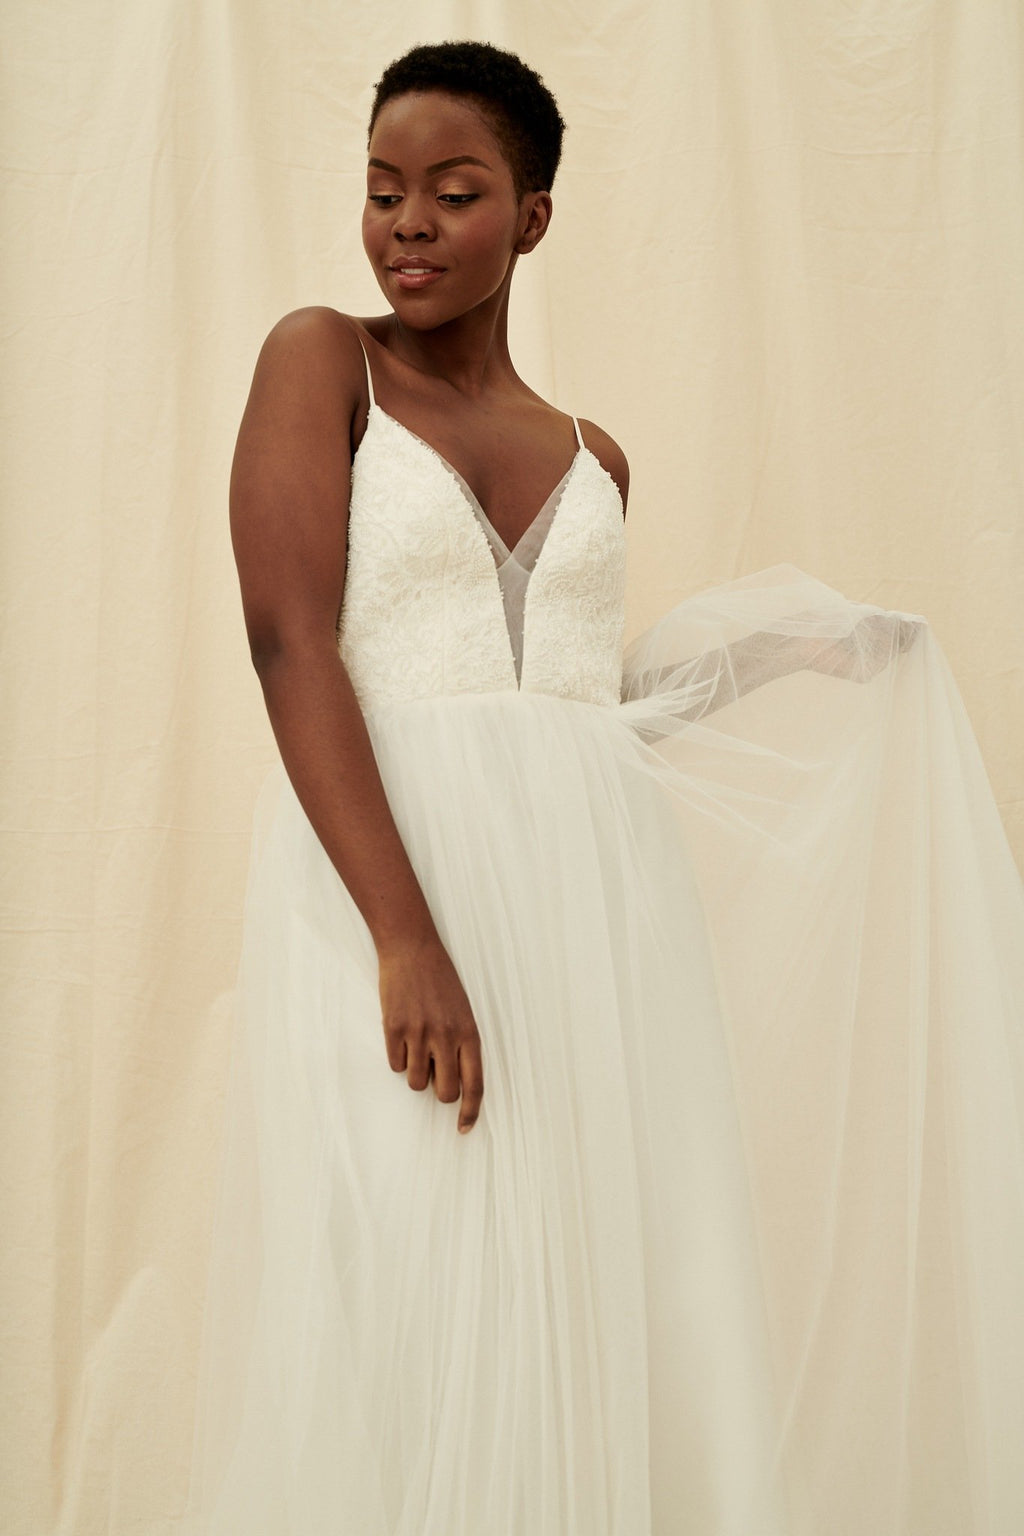 A scoop back dress with a plunging beaded bodice and a princess tulle skirt by Truvelle